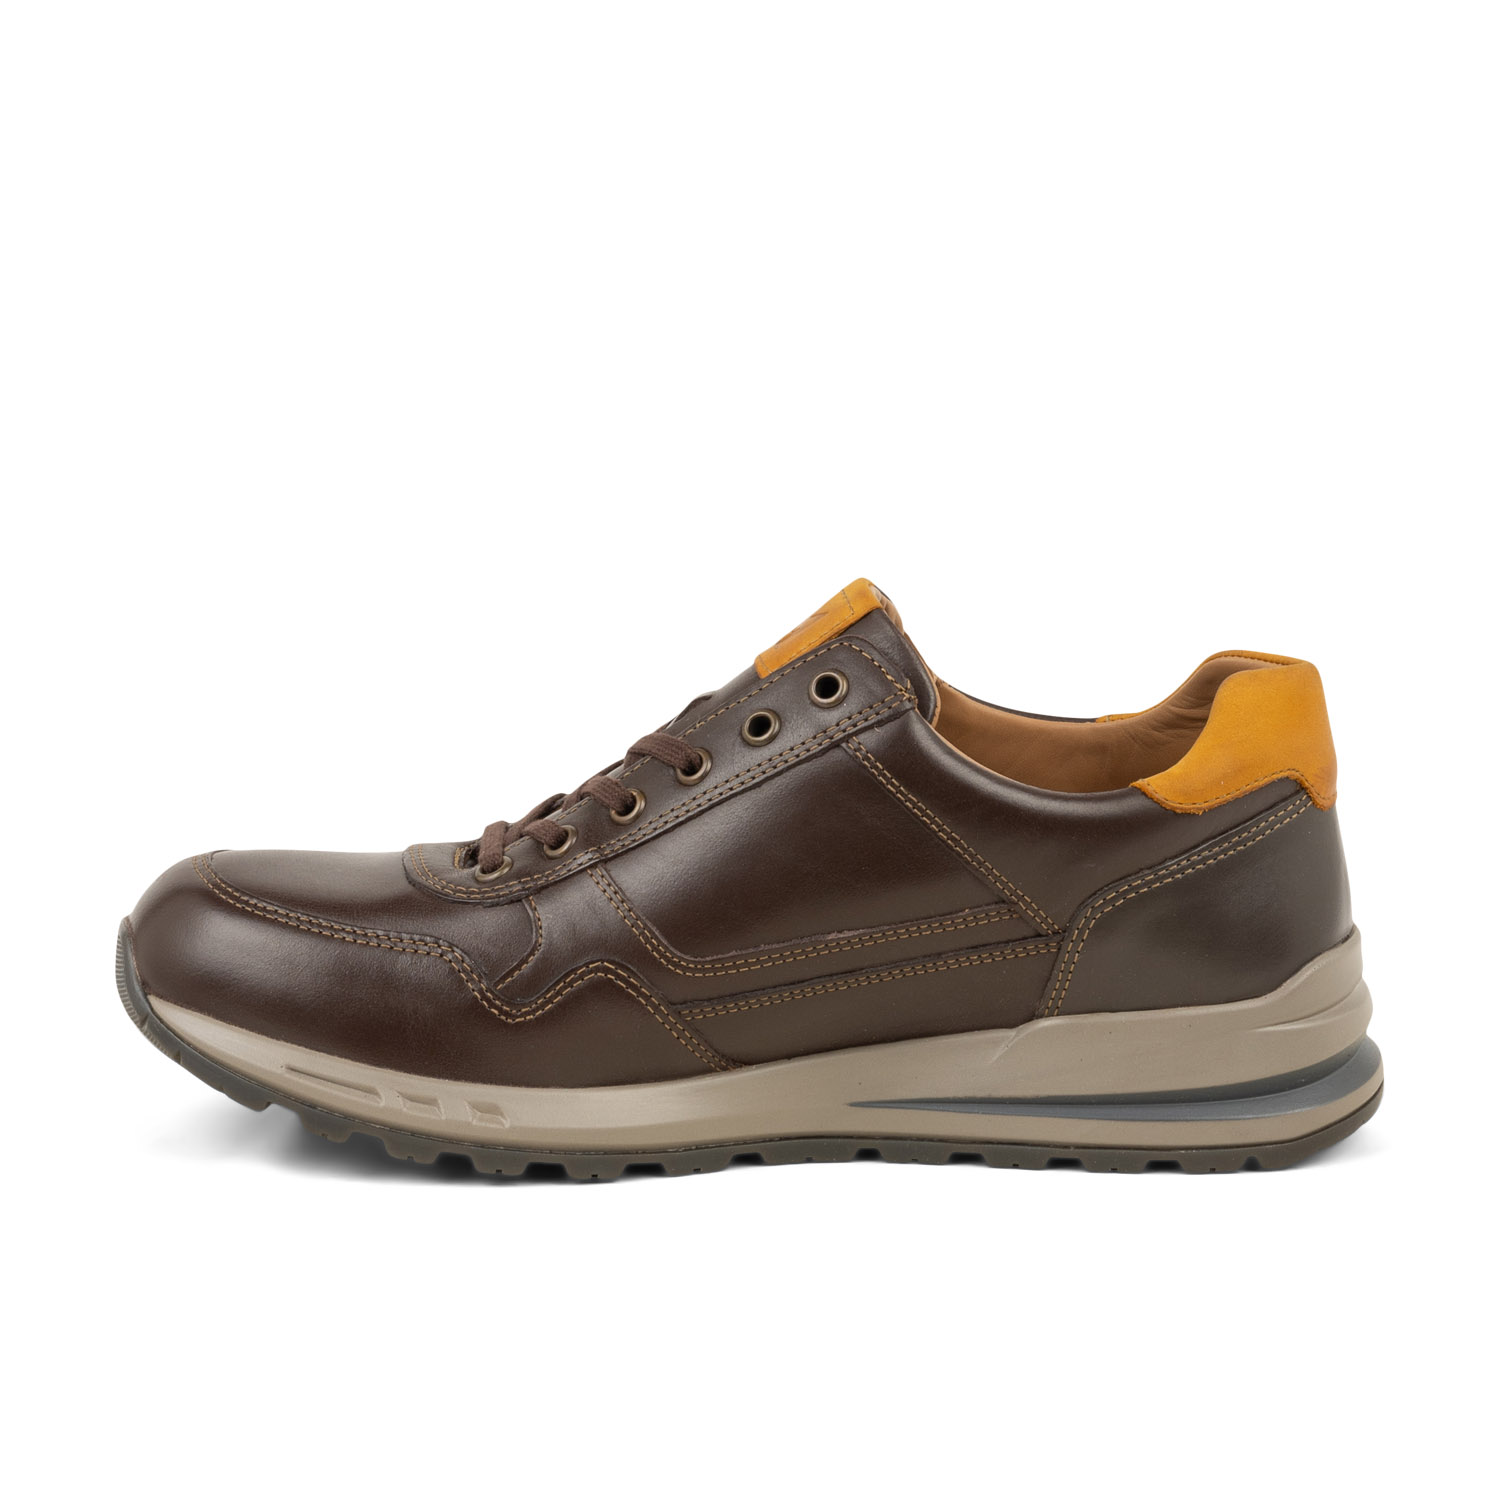 04 - BRADLEY - MEPHISTO - Chaussures à lacets - Cuir